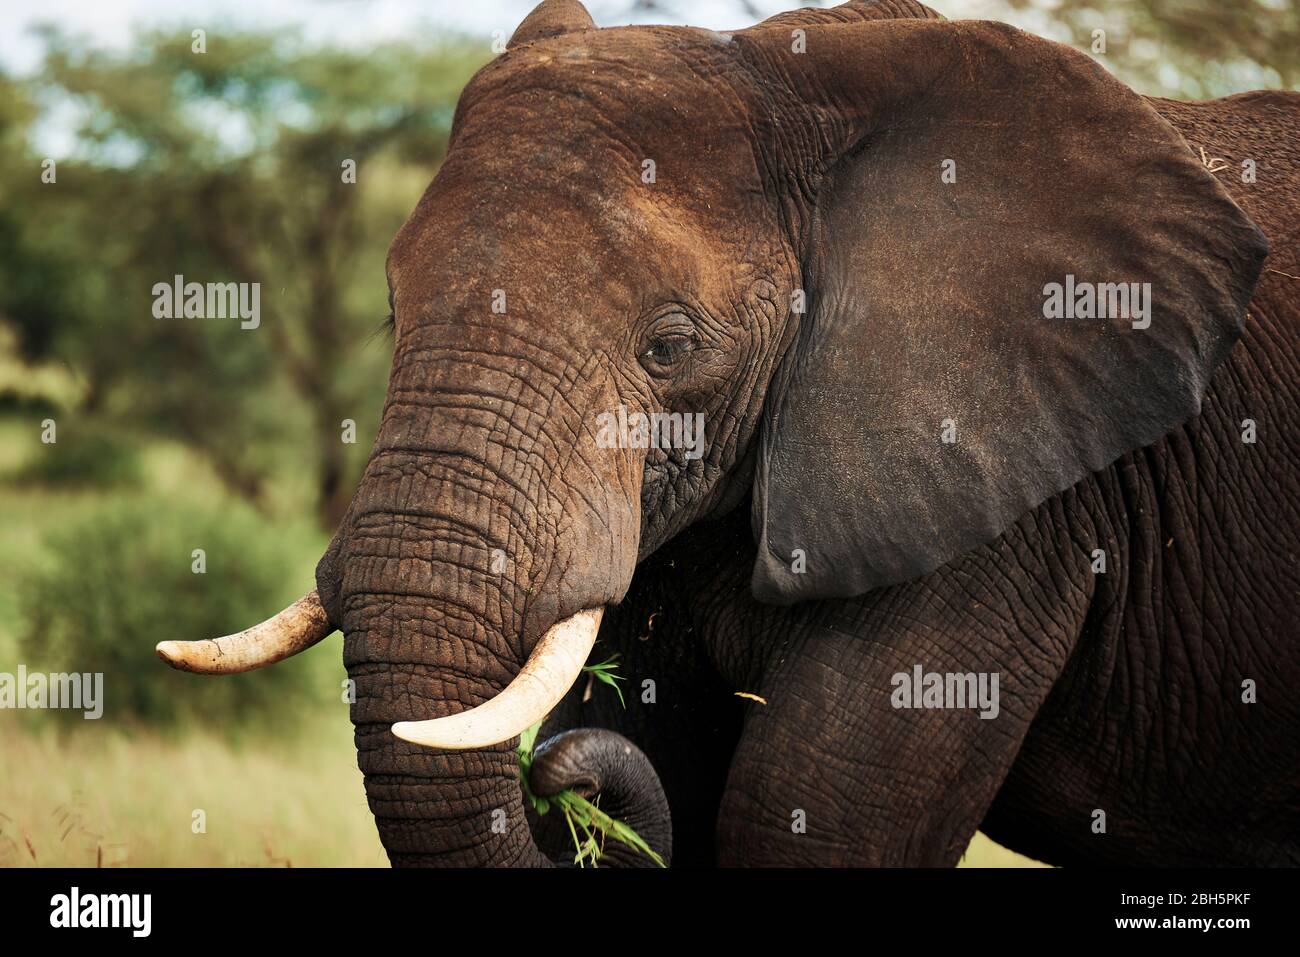 Close up of elephant in Africa Stock Photo